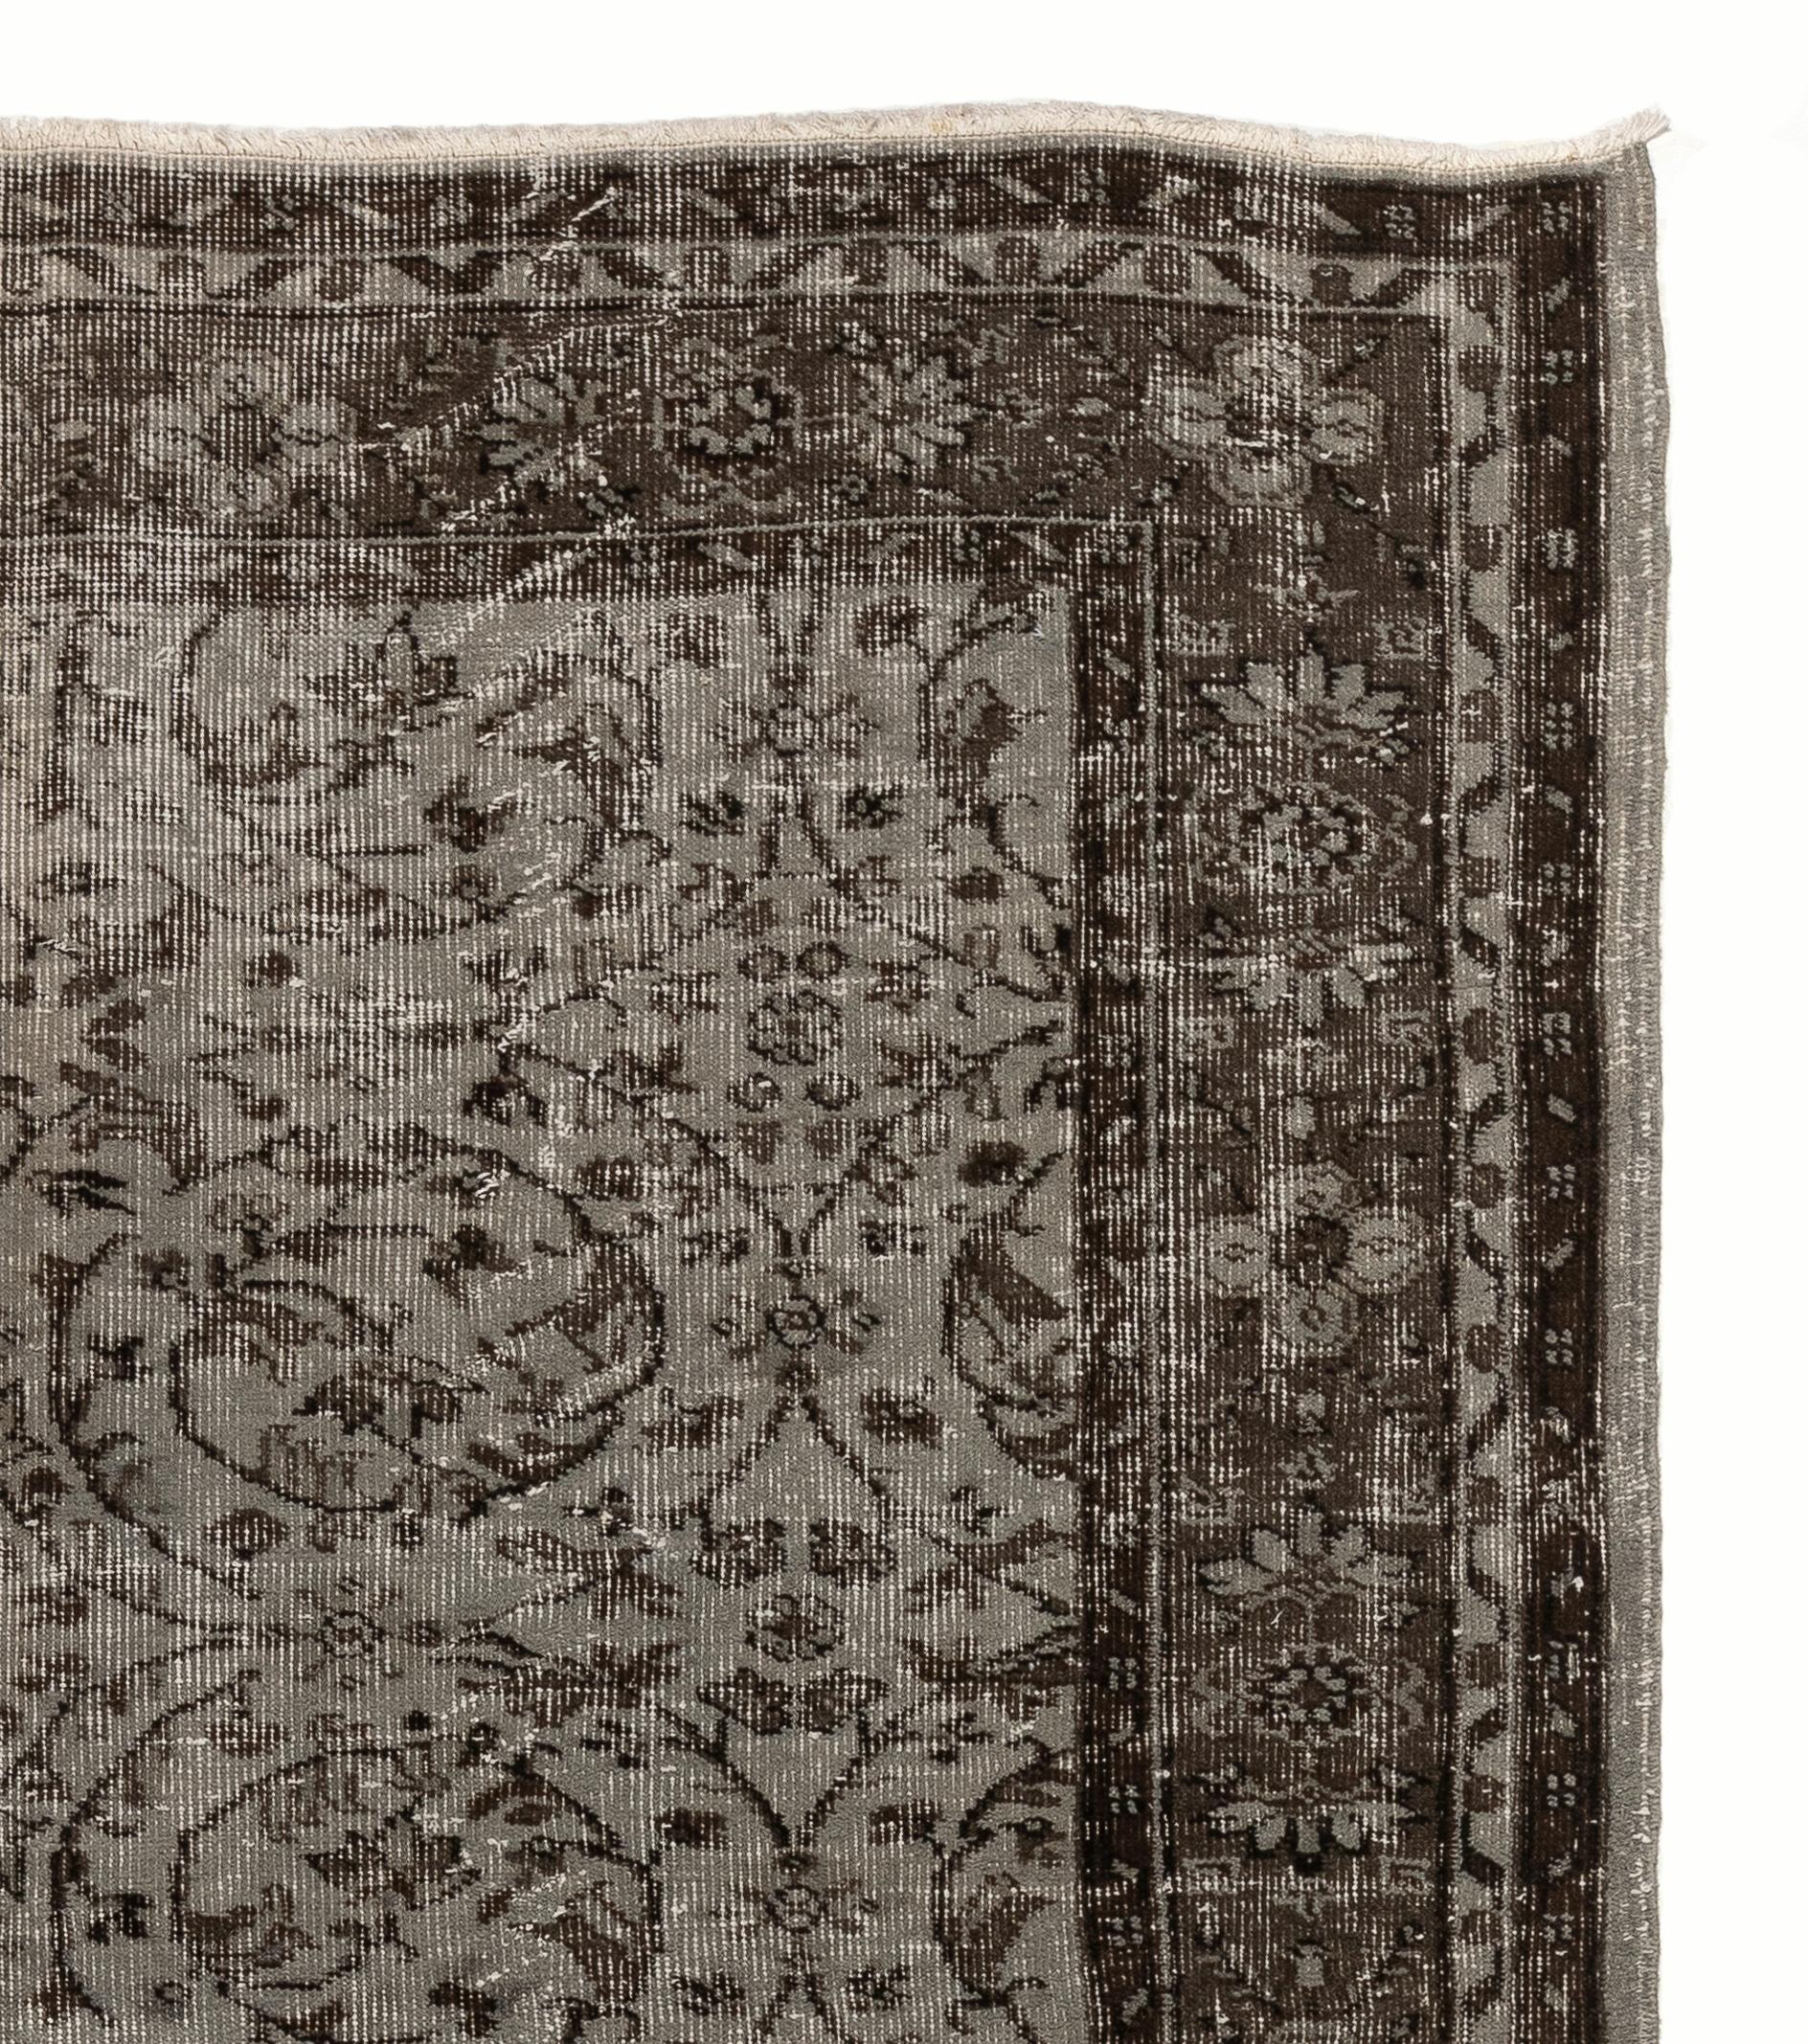 Modern 5.9x9.5 Ft Vintage Floral Motif Handmade Area Rug in Gray. Anatolian Wool Carpet For Sale